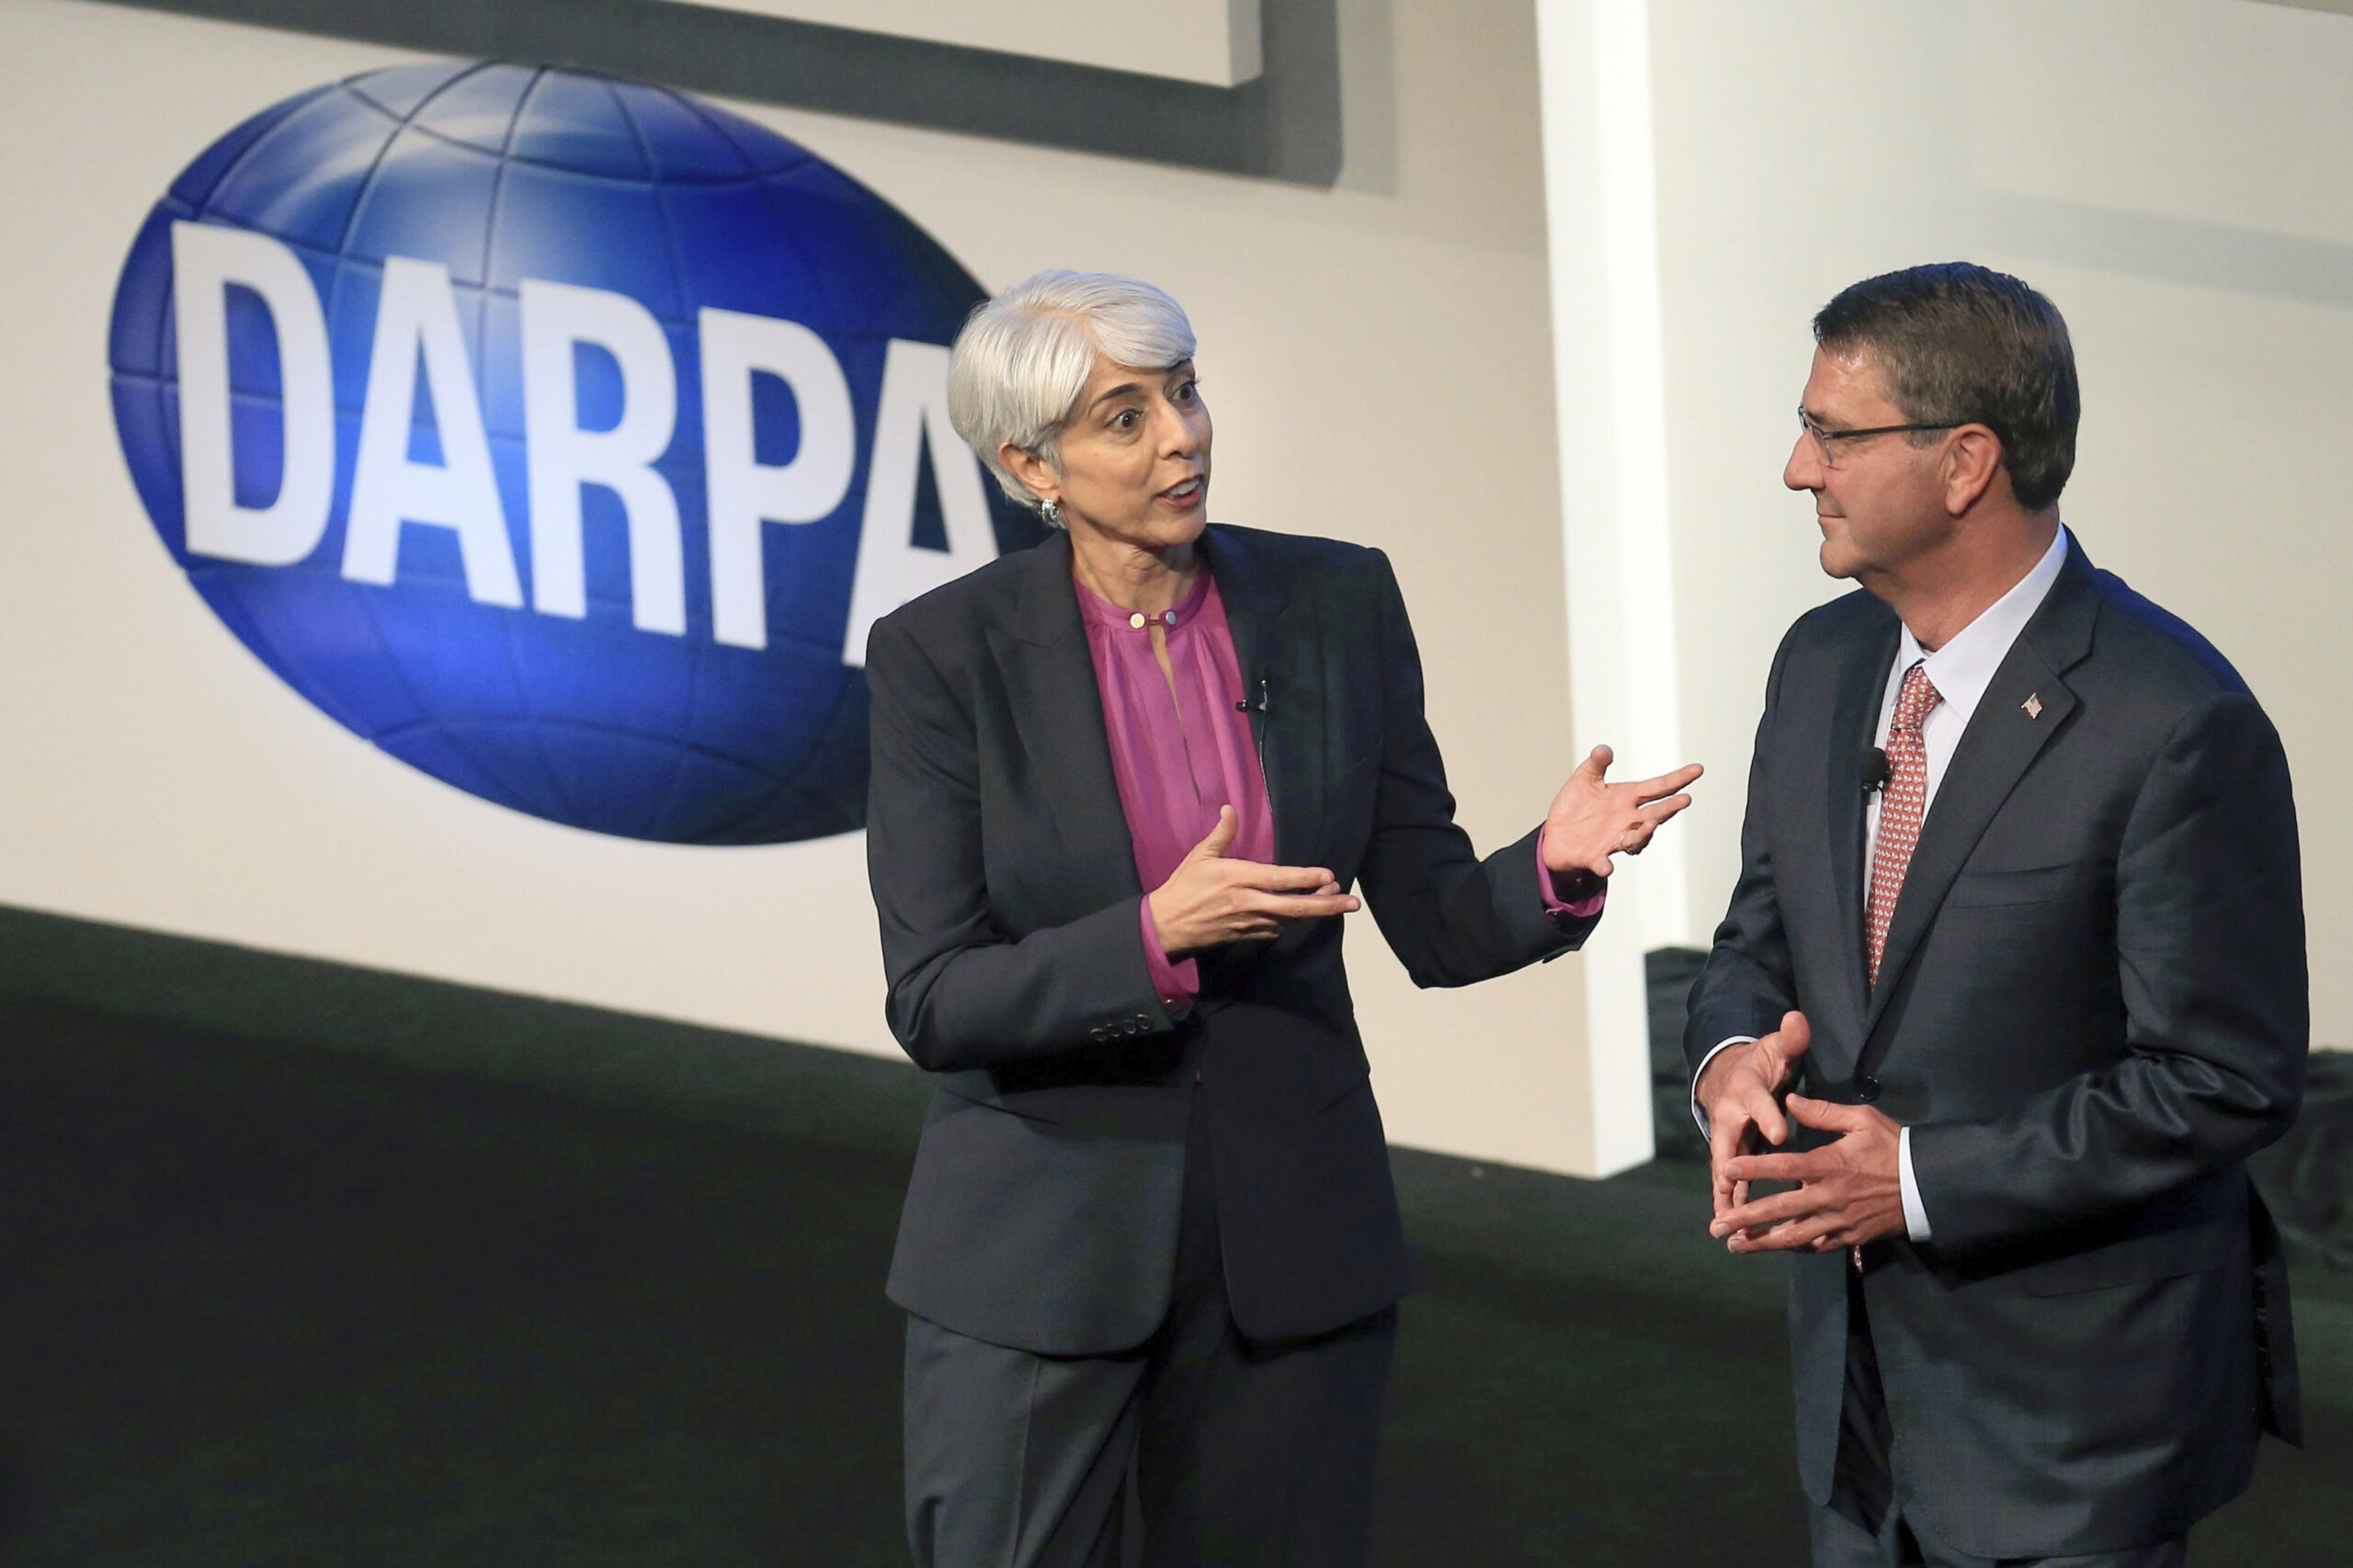 FILE - Arati Prabhakar, left, the director of Defense Advanced Research Projects Agency speaks after introducing then-Defense Secretary Ash Carter to speak Sept. 9, 2015, at the opening of the DARPA conference at the America's Center in St. Louis. President Joe Biden has chosen Arati Prabhakar to be his science adviser. (Christian Gooden/St. Louis Post-Dispatch via AP, File)